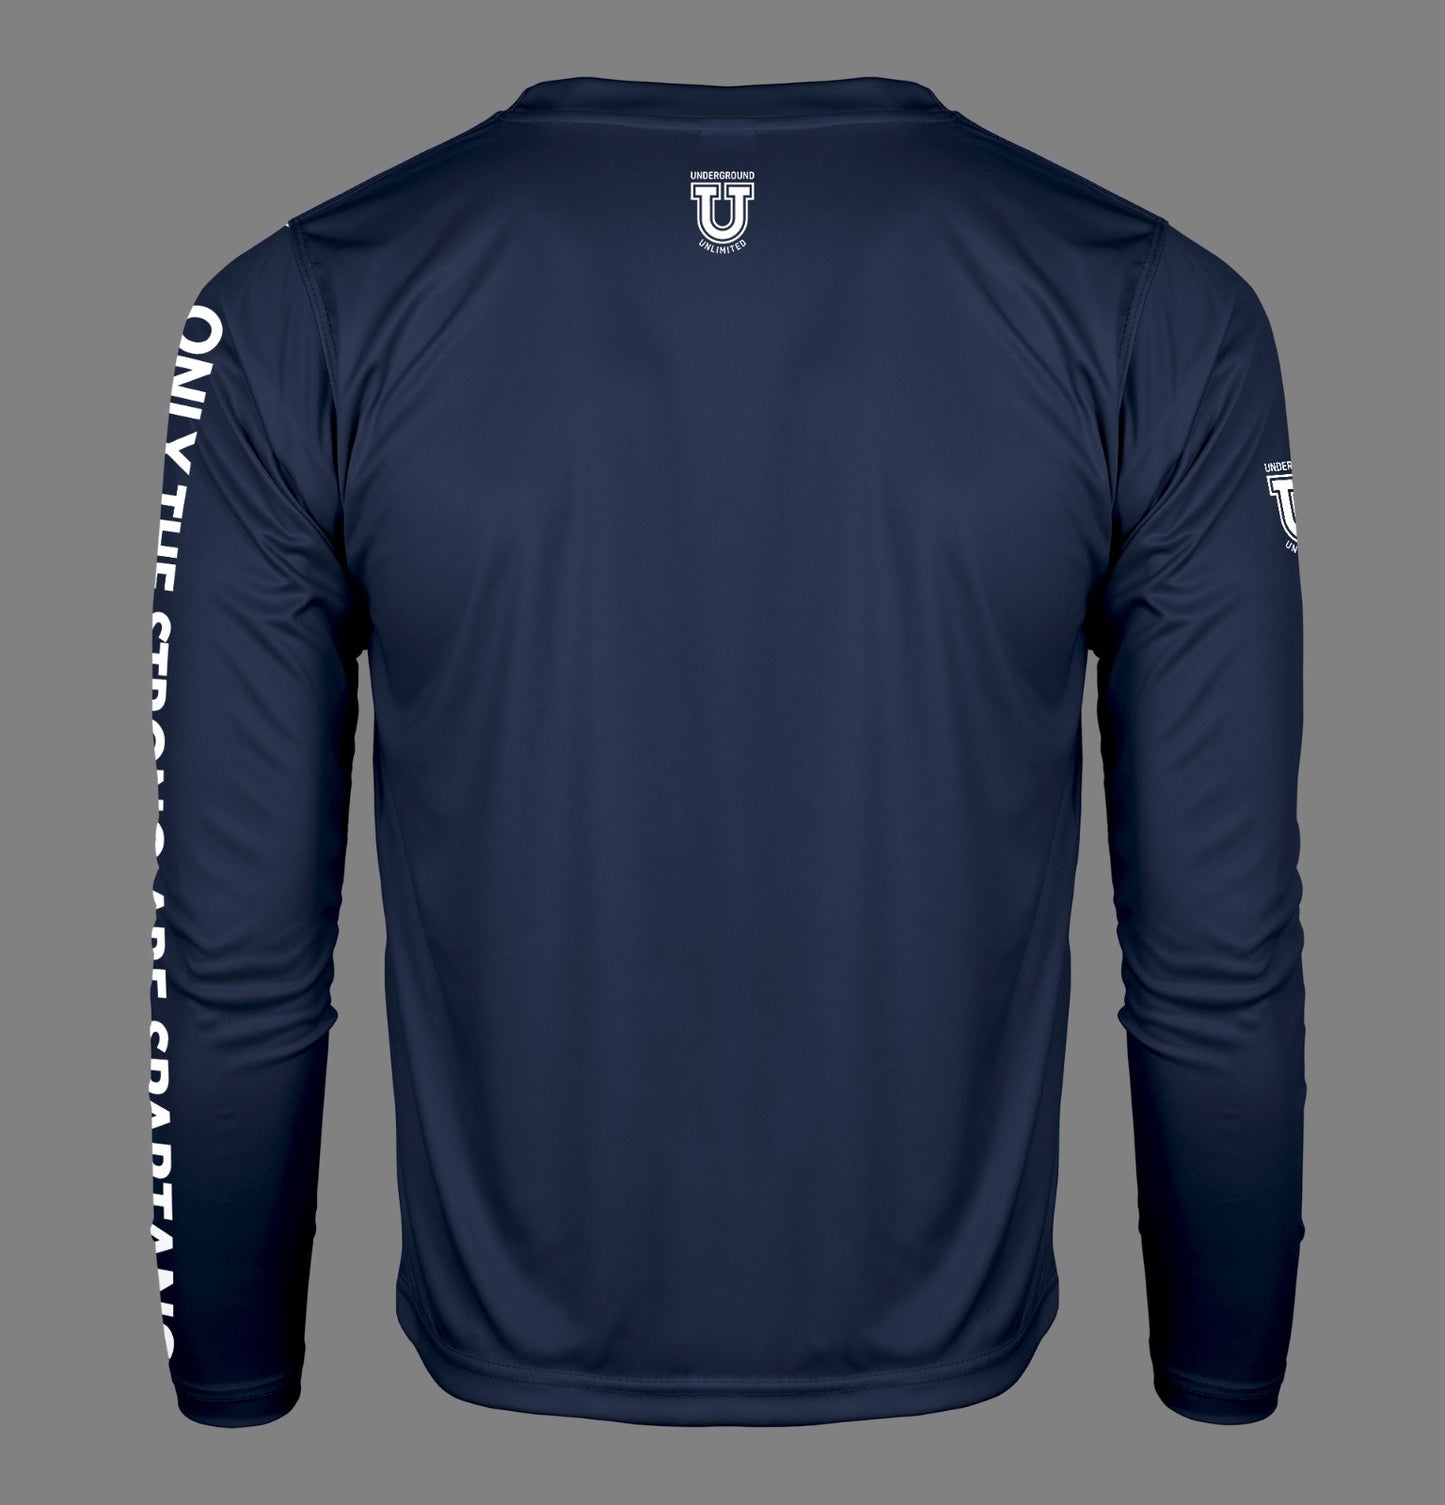 W.T. Chipman Pro Performance Sun Long Sleeve ~ Spartan Script Navy "Only the Strong are Spartans"